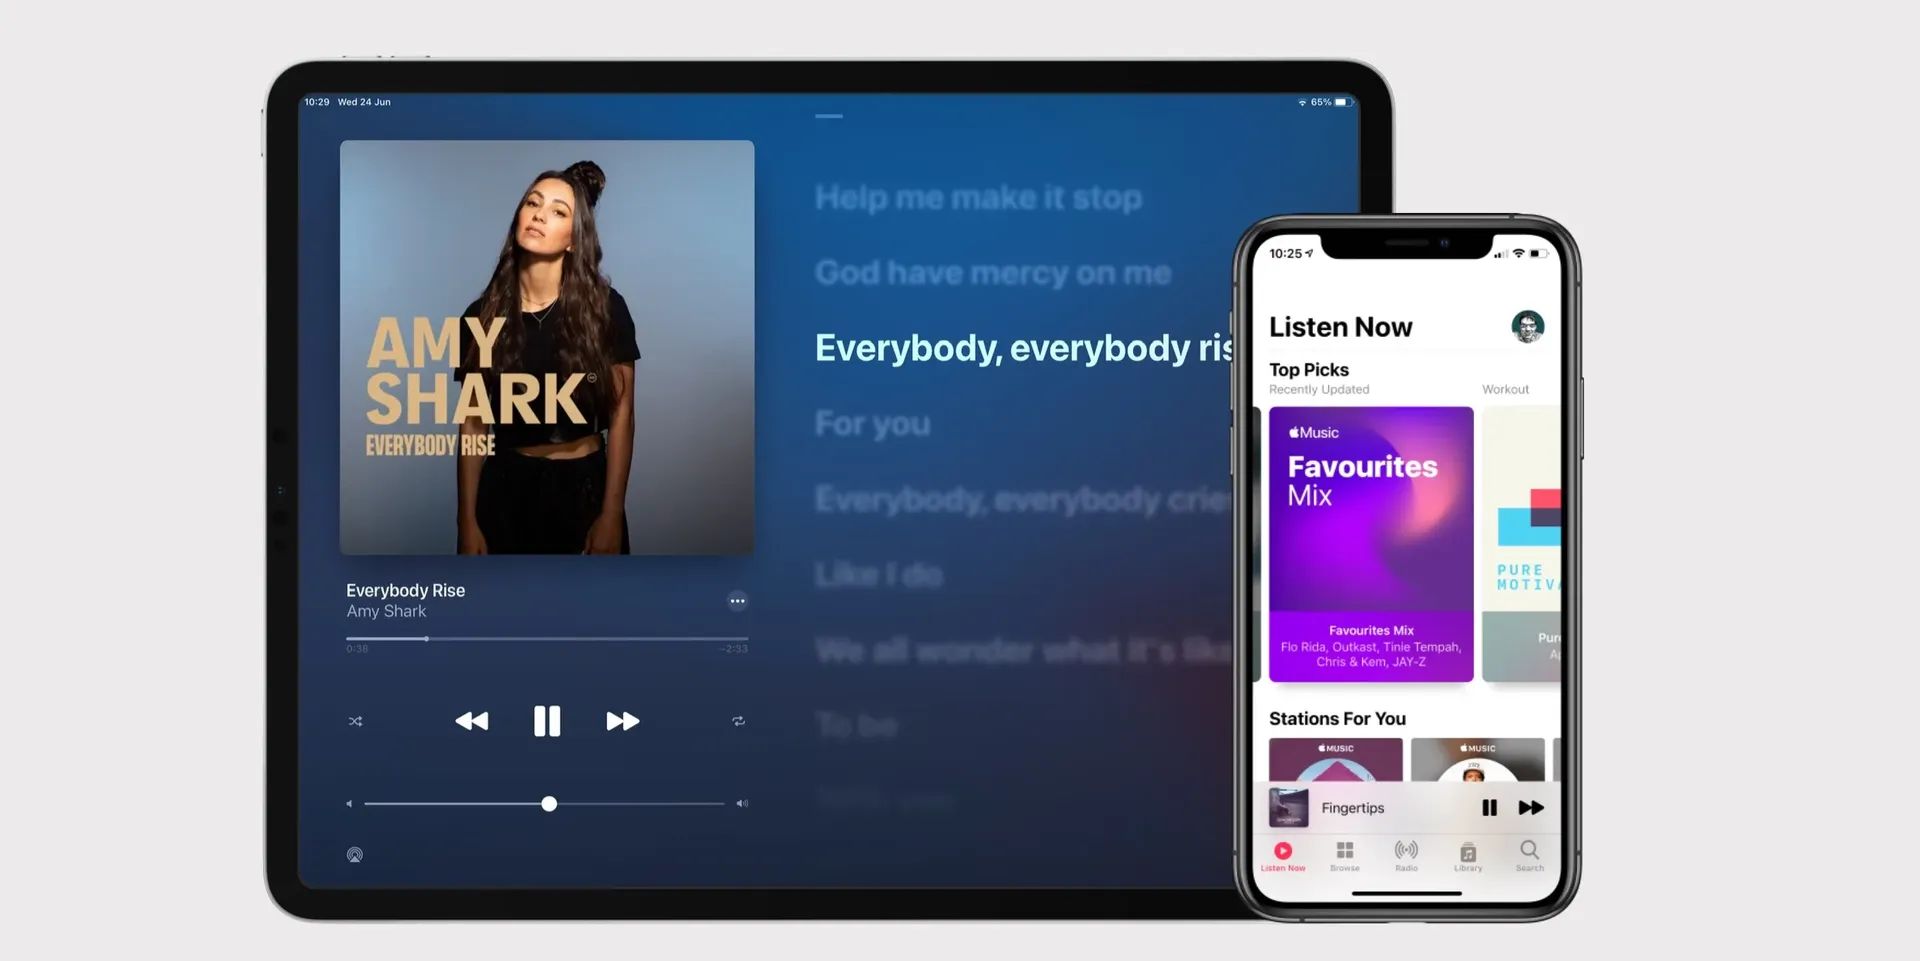 How to turn off Apple Music autoplay?